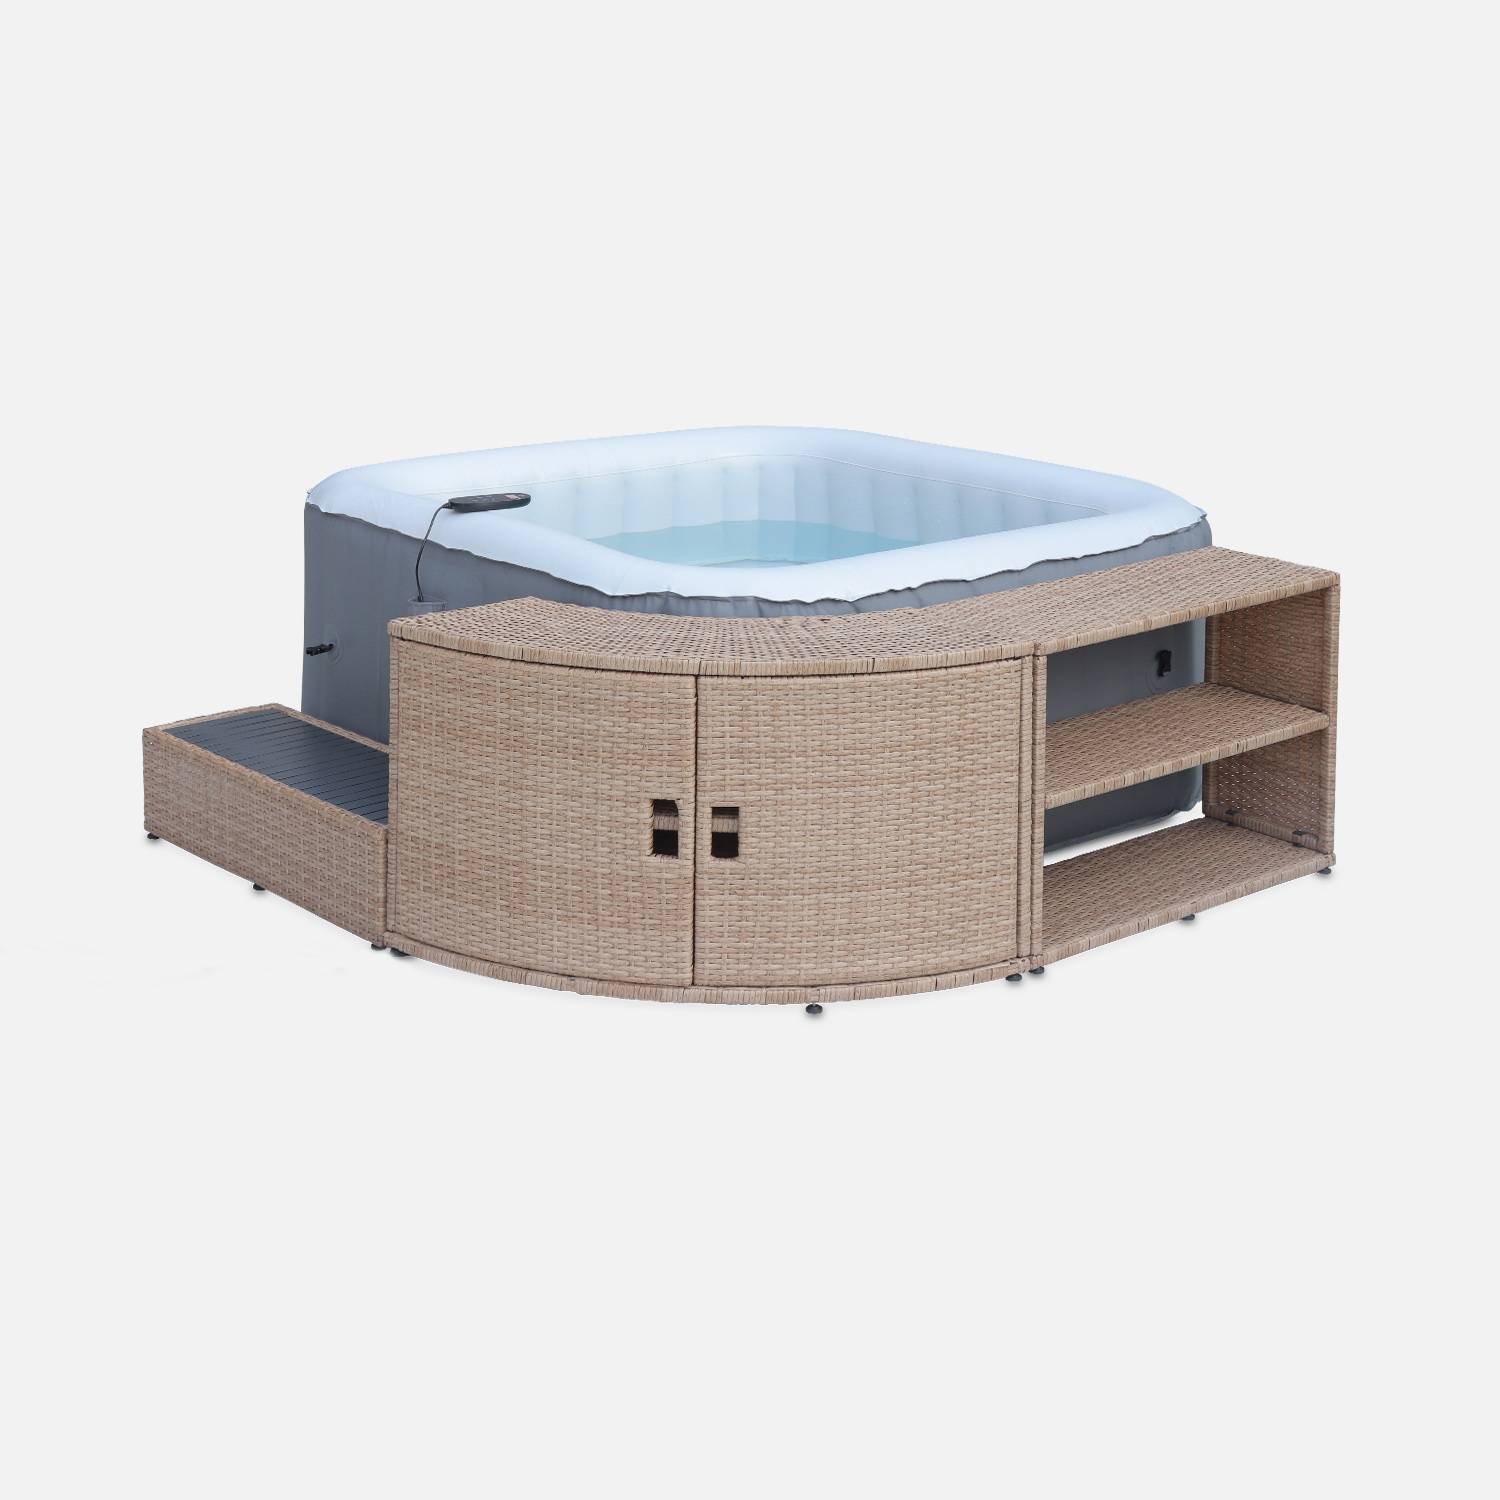 Natural polyrattan surround for square hot tub with cabinet, shelf and footstep,sweeek,Photo3